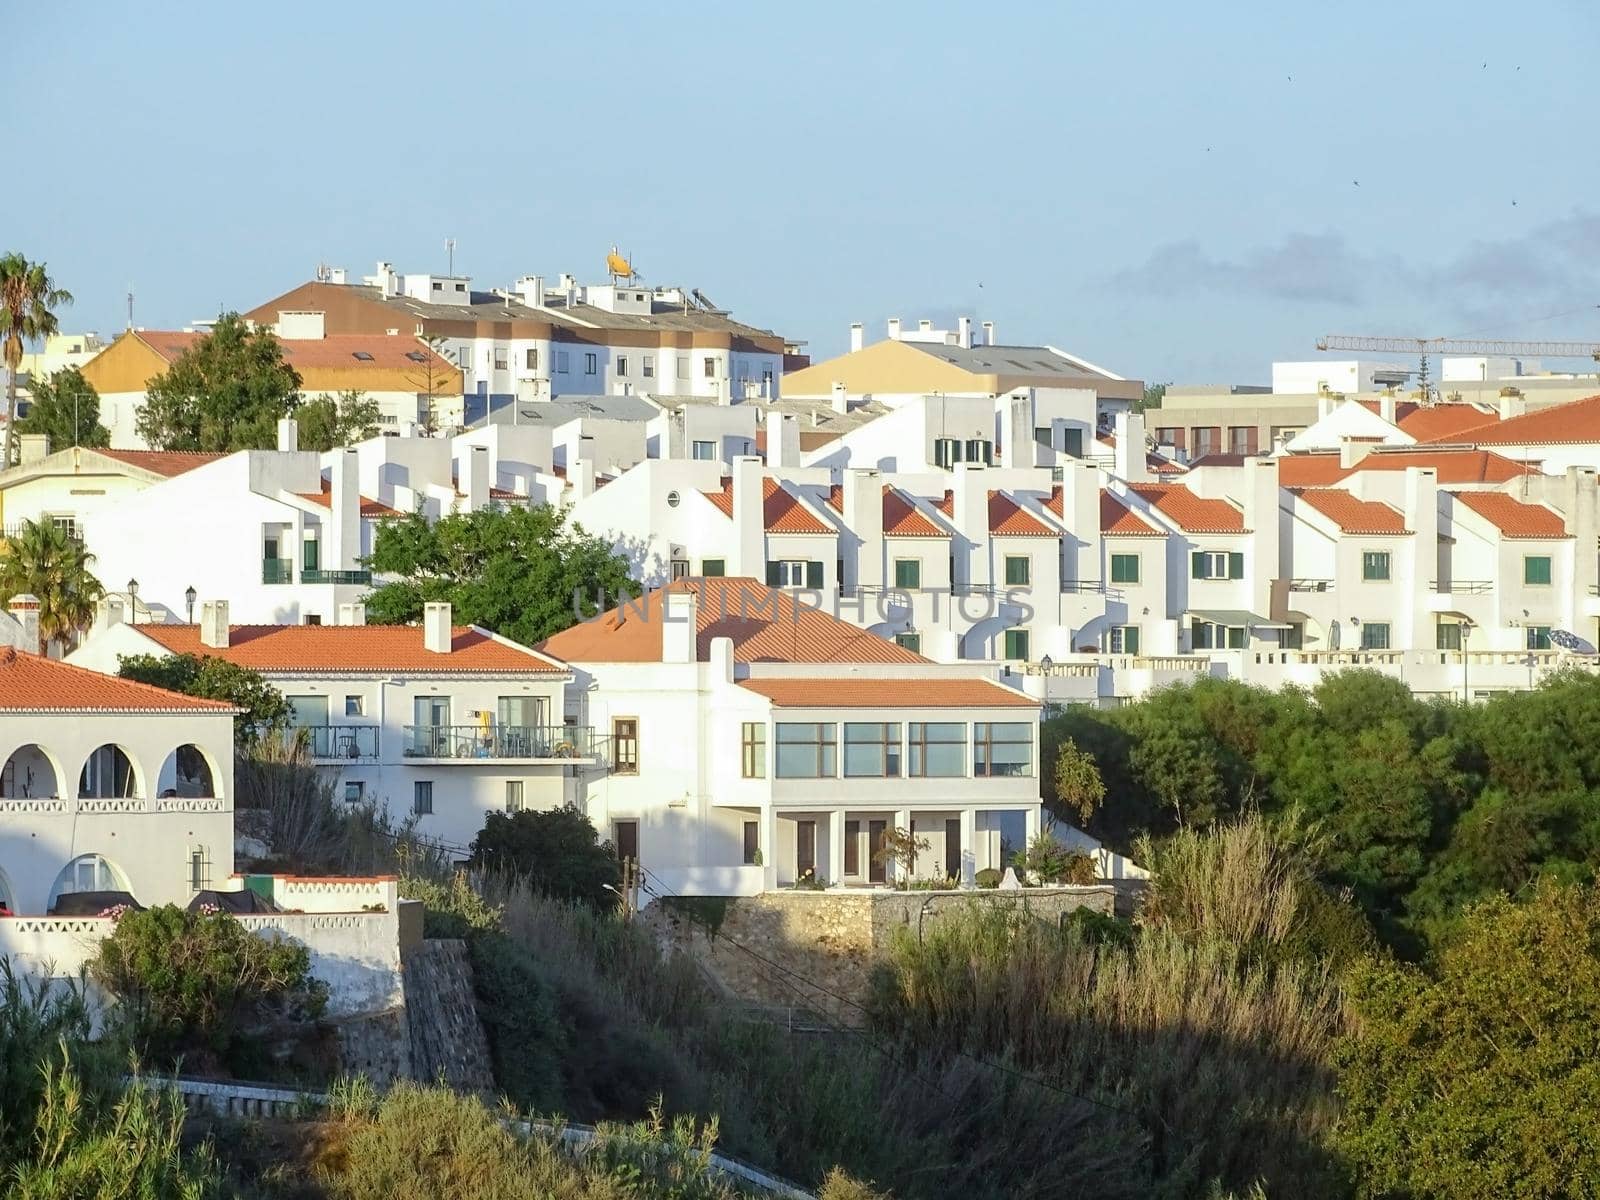 View of white houses with orange tiled roofs in the Portuguese coastal town Sines